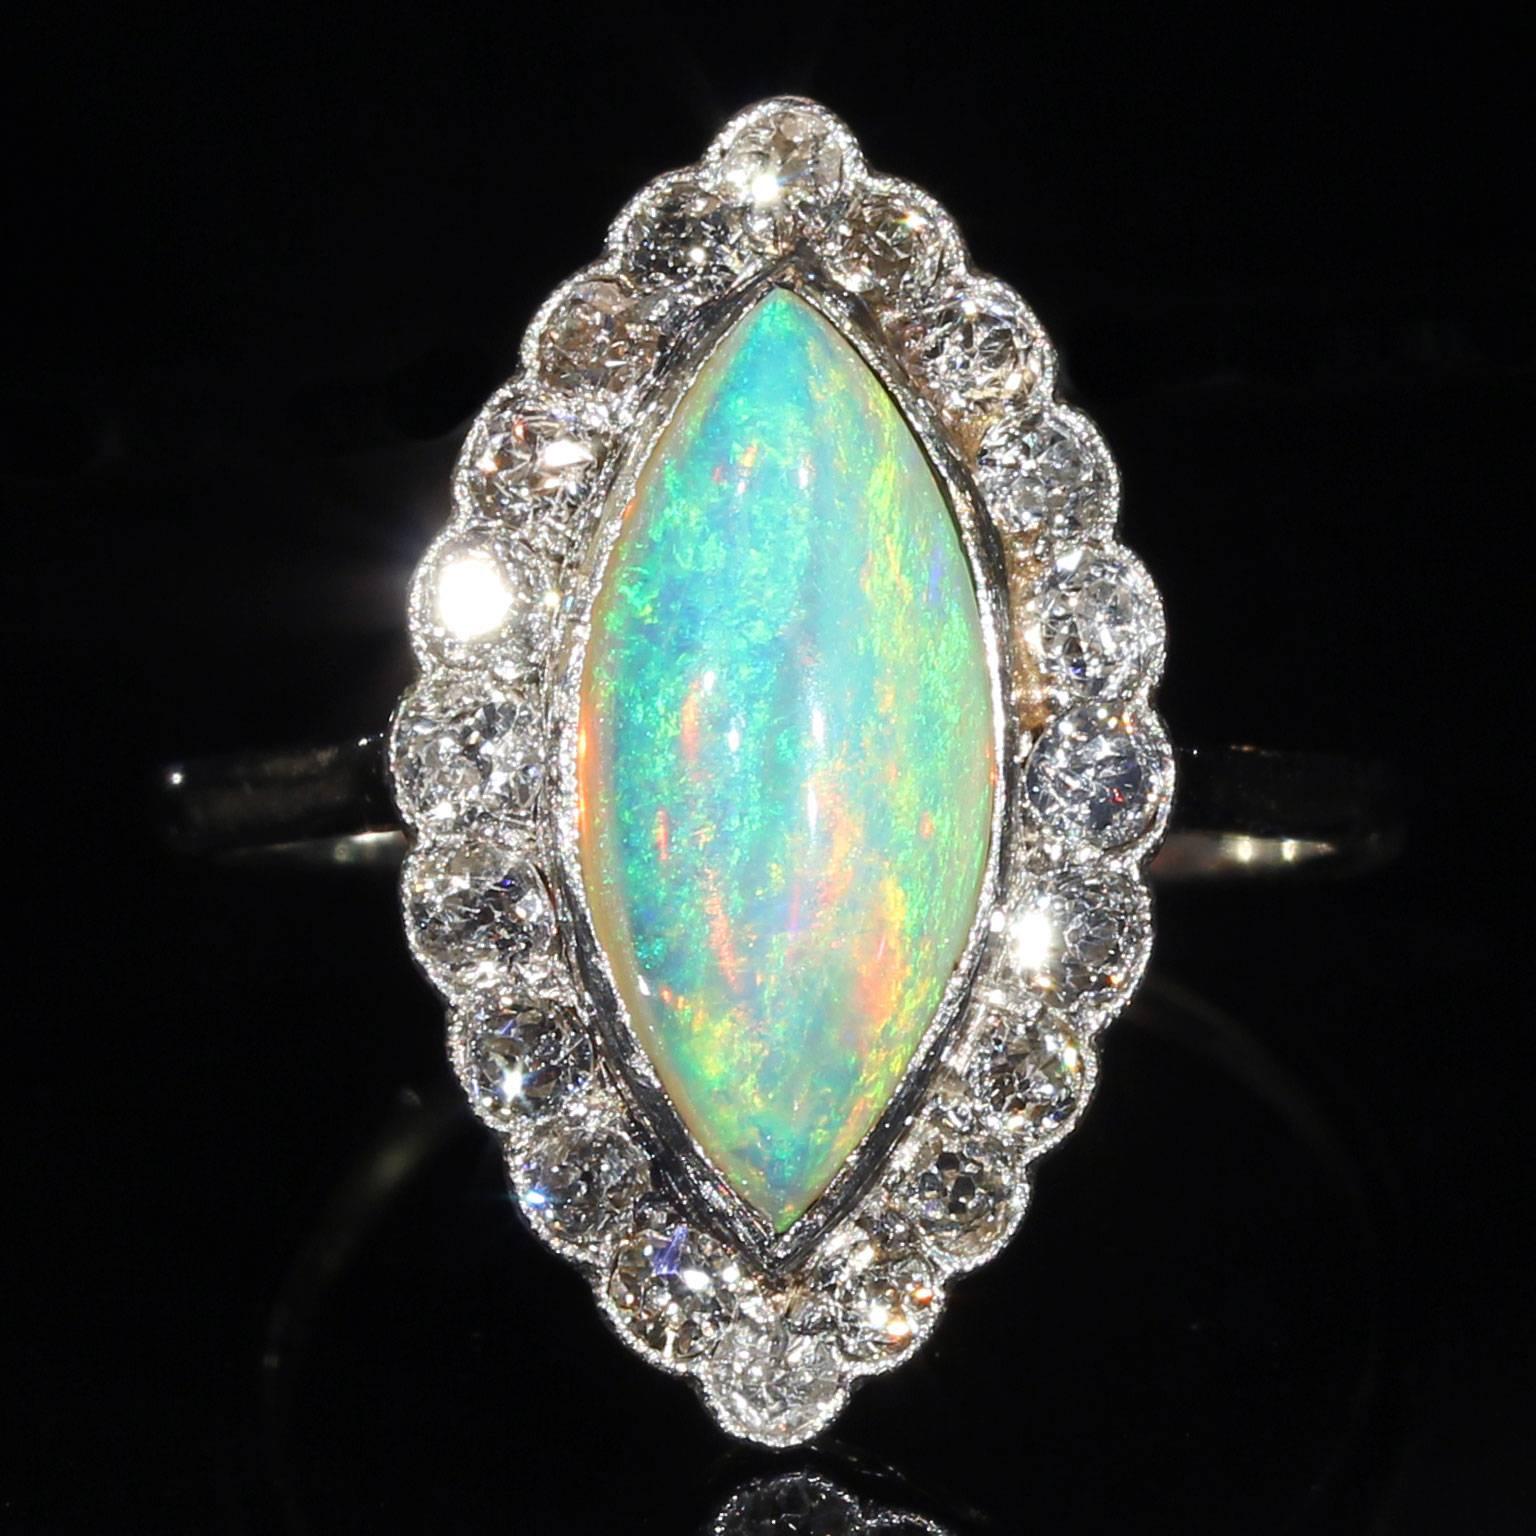 This fantastic Opal has a magnificent play of color and is cut in a tantalizing cabochon marquise. It’s blues and greens, oranges, yellows and reds can be seen dancing and glimmering in any light, from any angle. The luminous gem is set within a